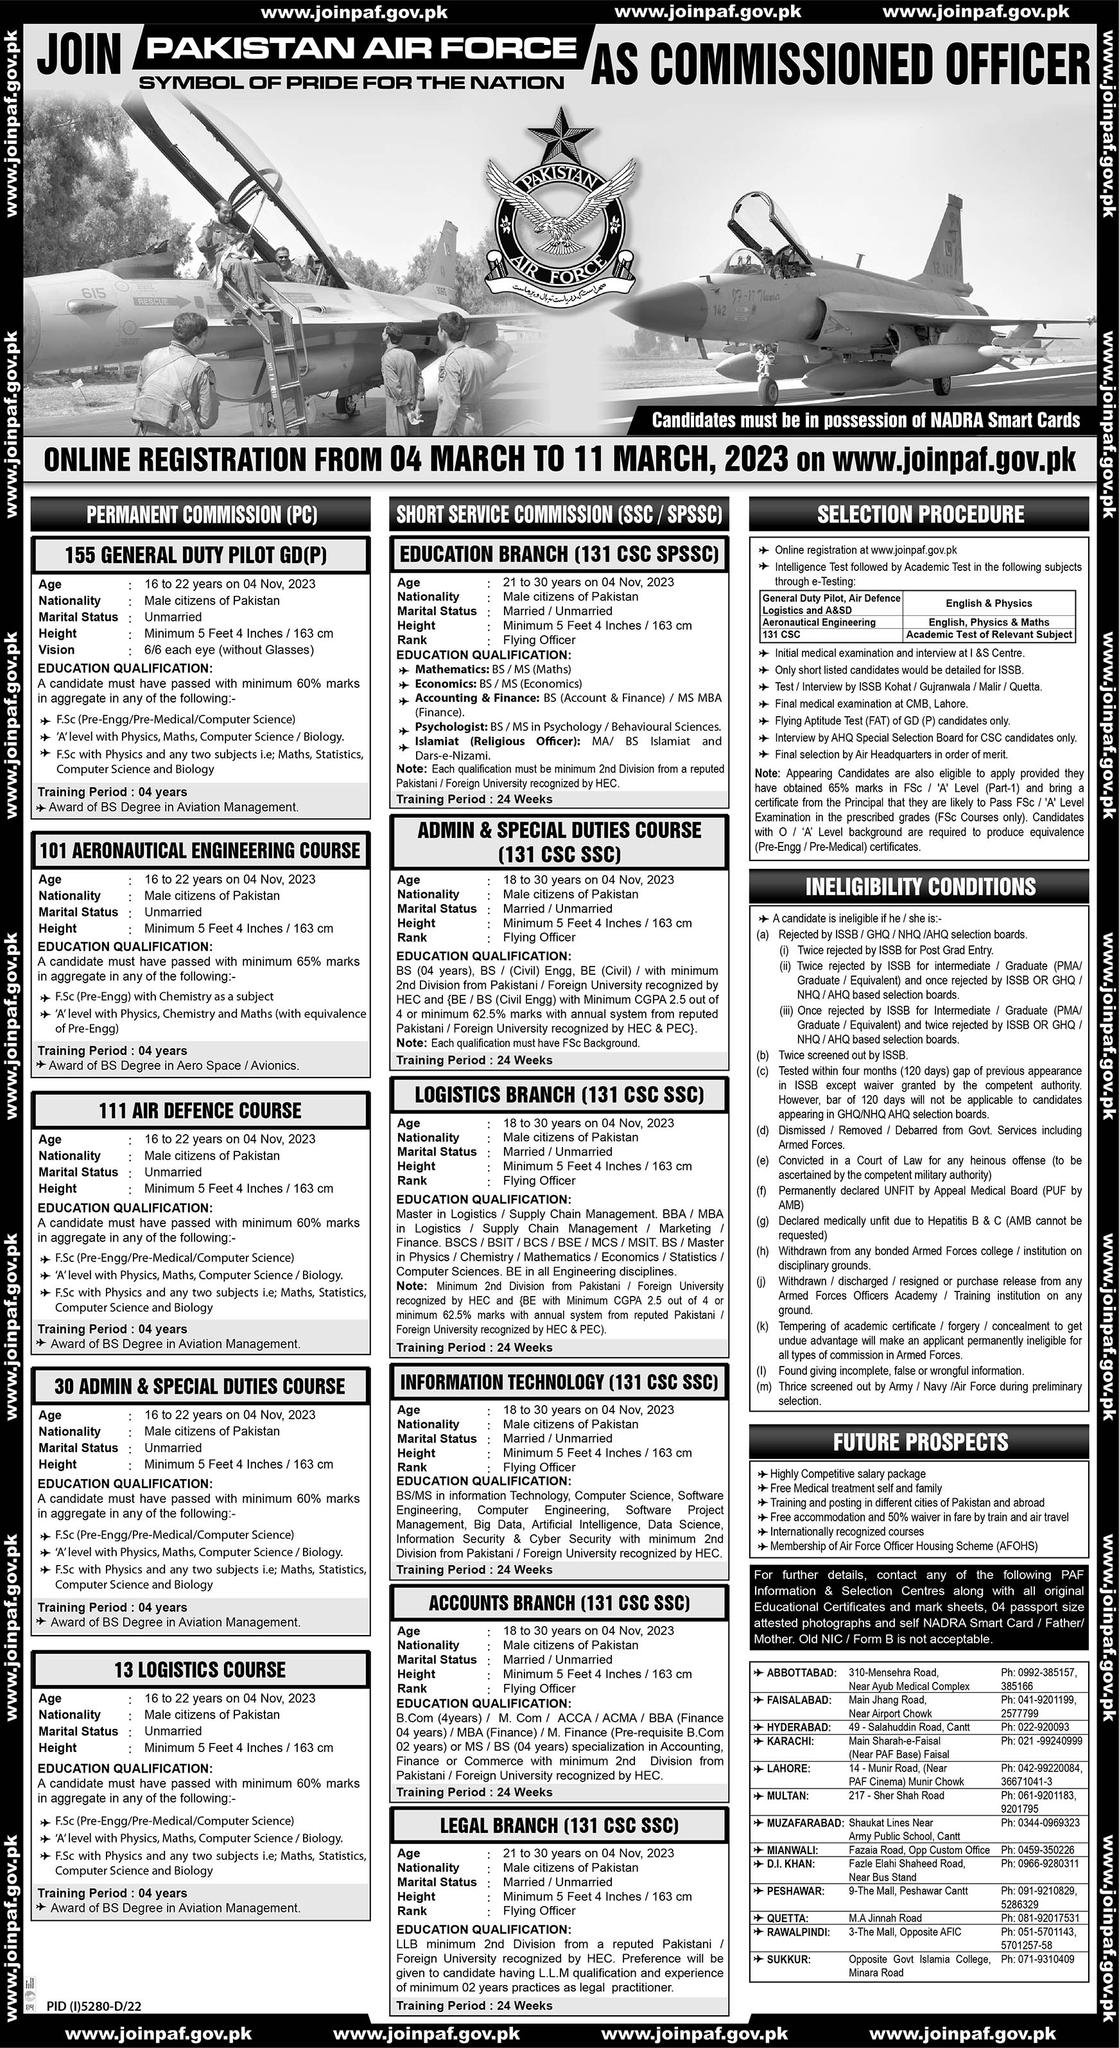 Join Pakistan Air Force (PAF) as Commissioned Officer 2023